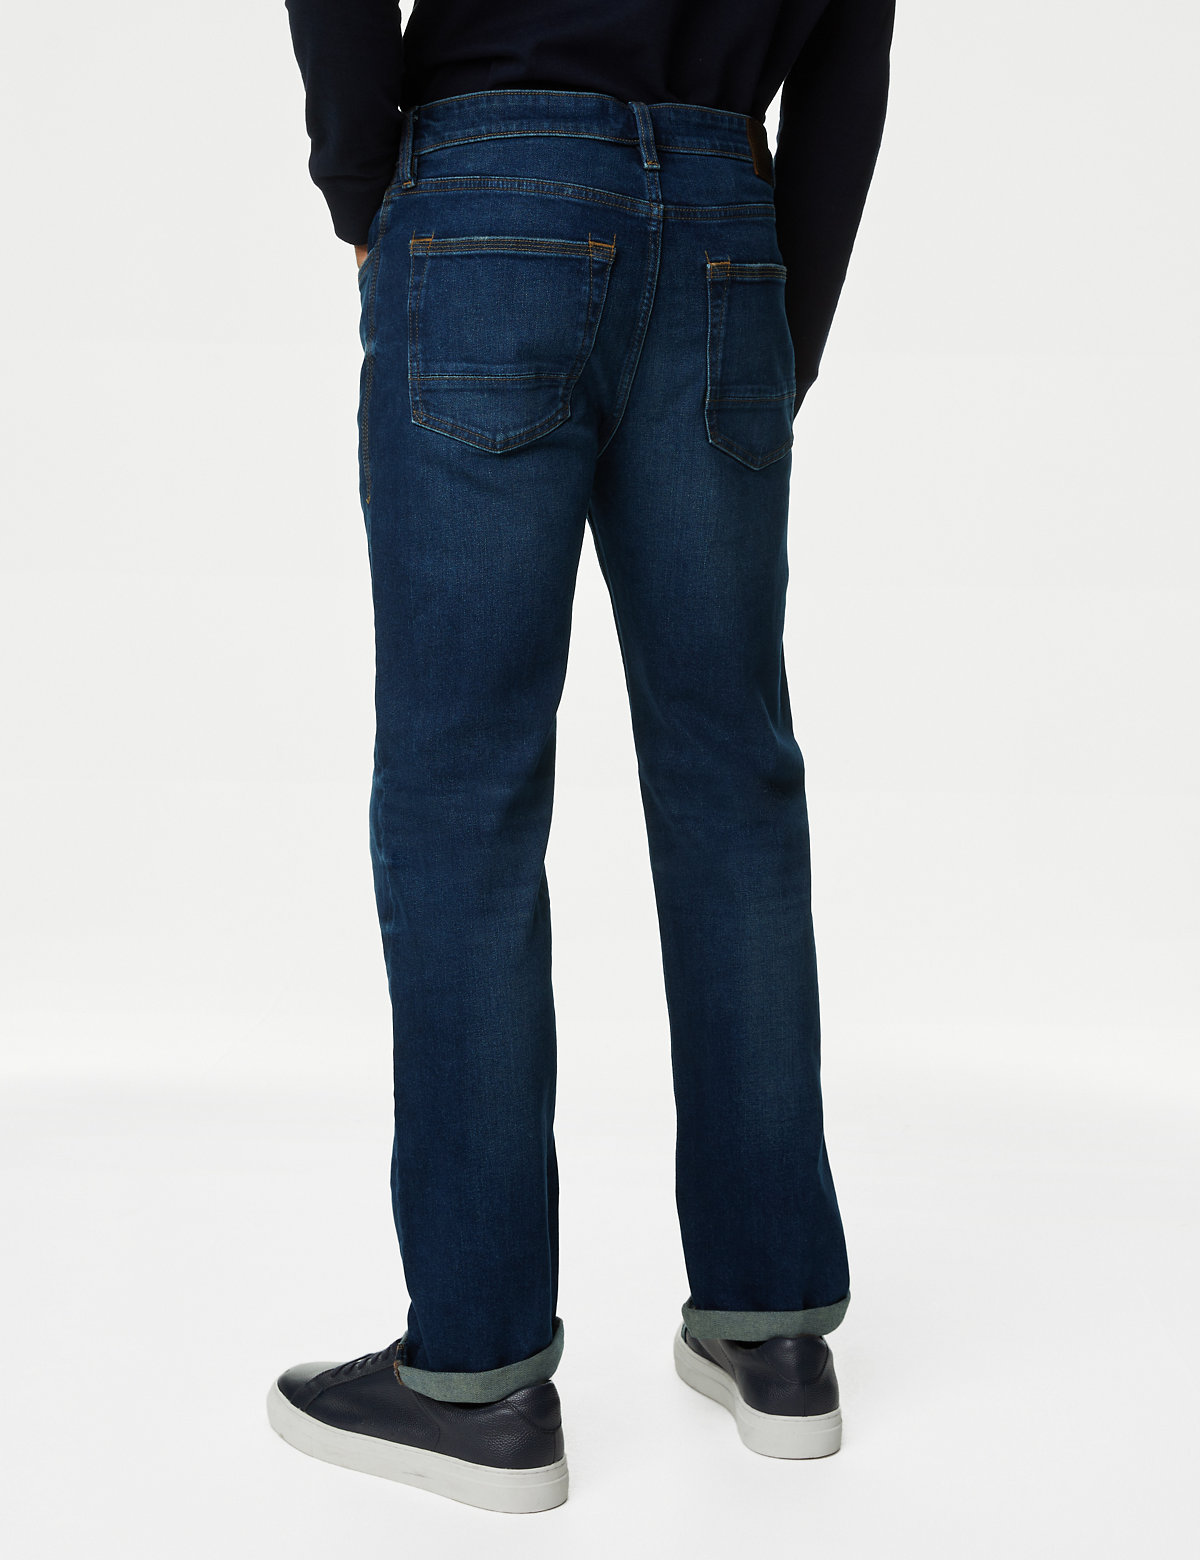 Straight Fit Vintage Wash Stretch Jeans